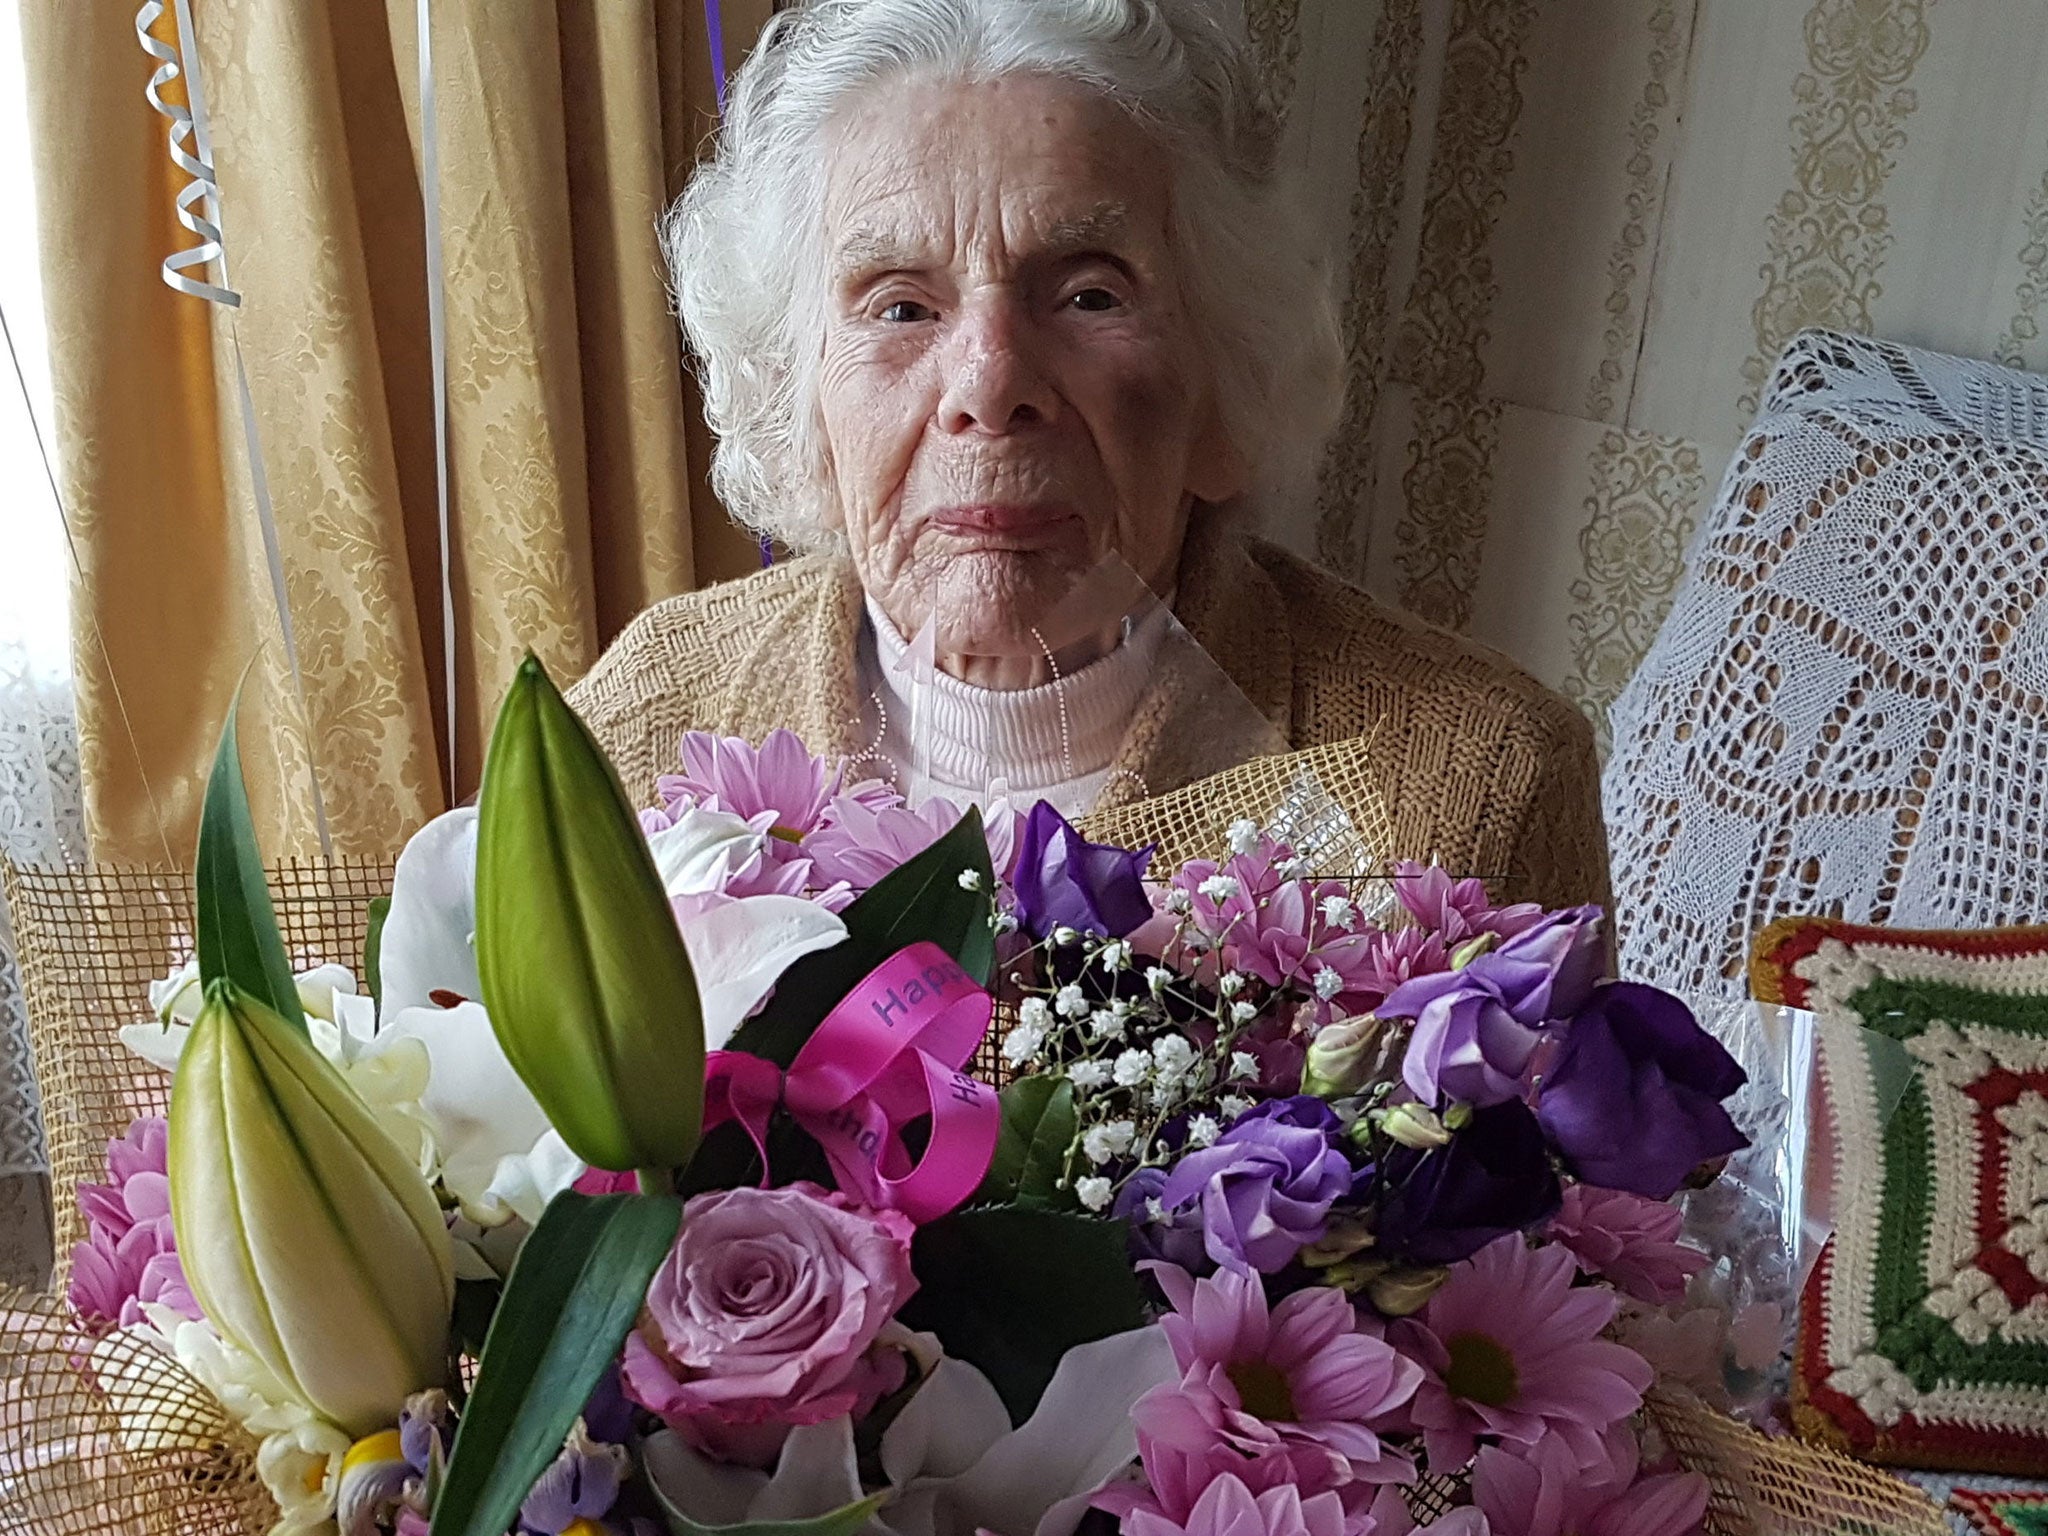 100-year-old robbery victim Zofija Kaczan, who had her neck broken in an attack on 28 May and died two days later